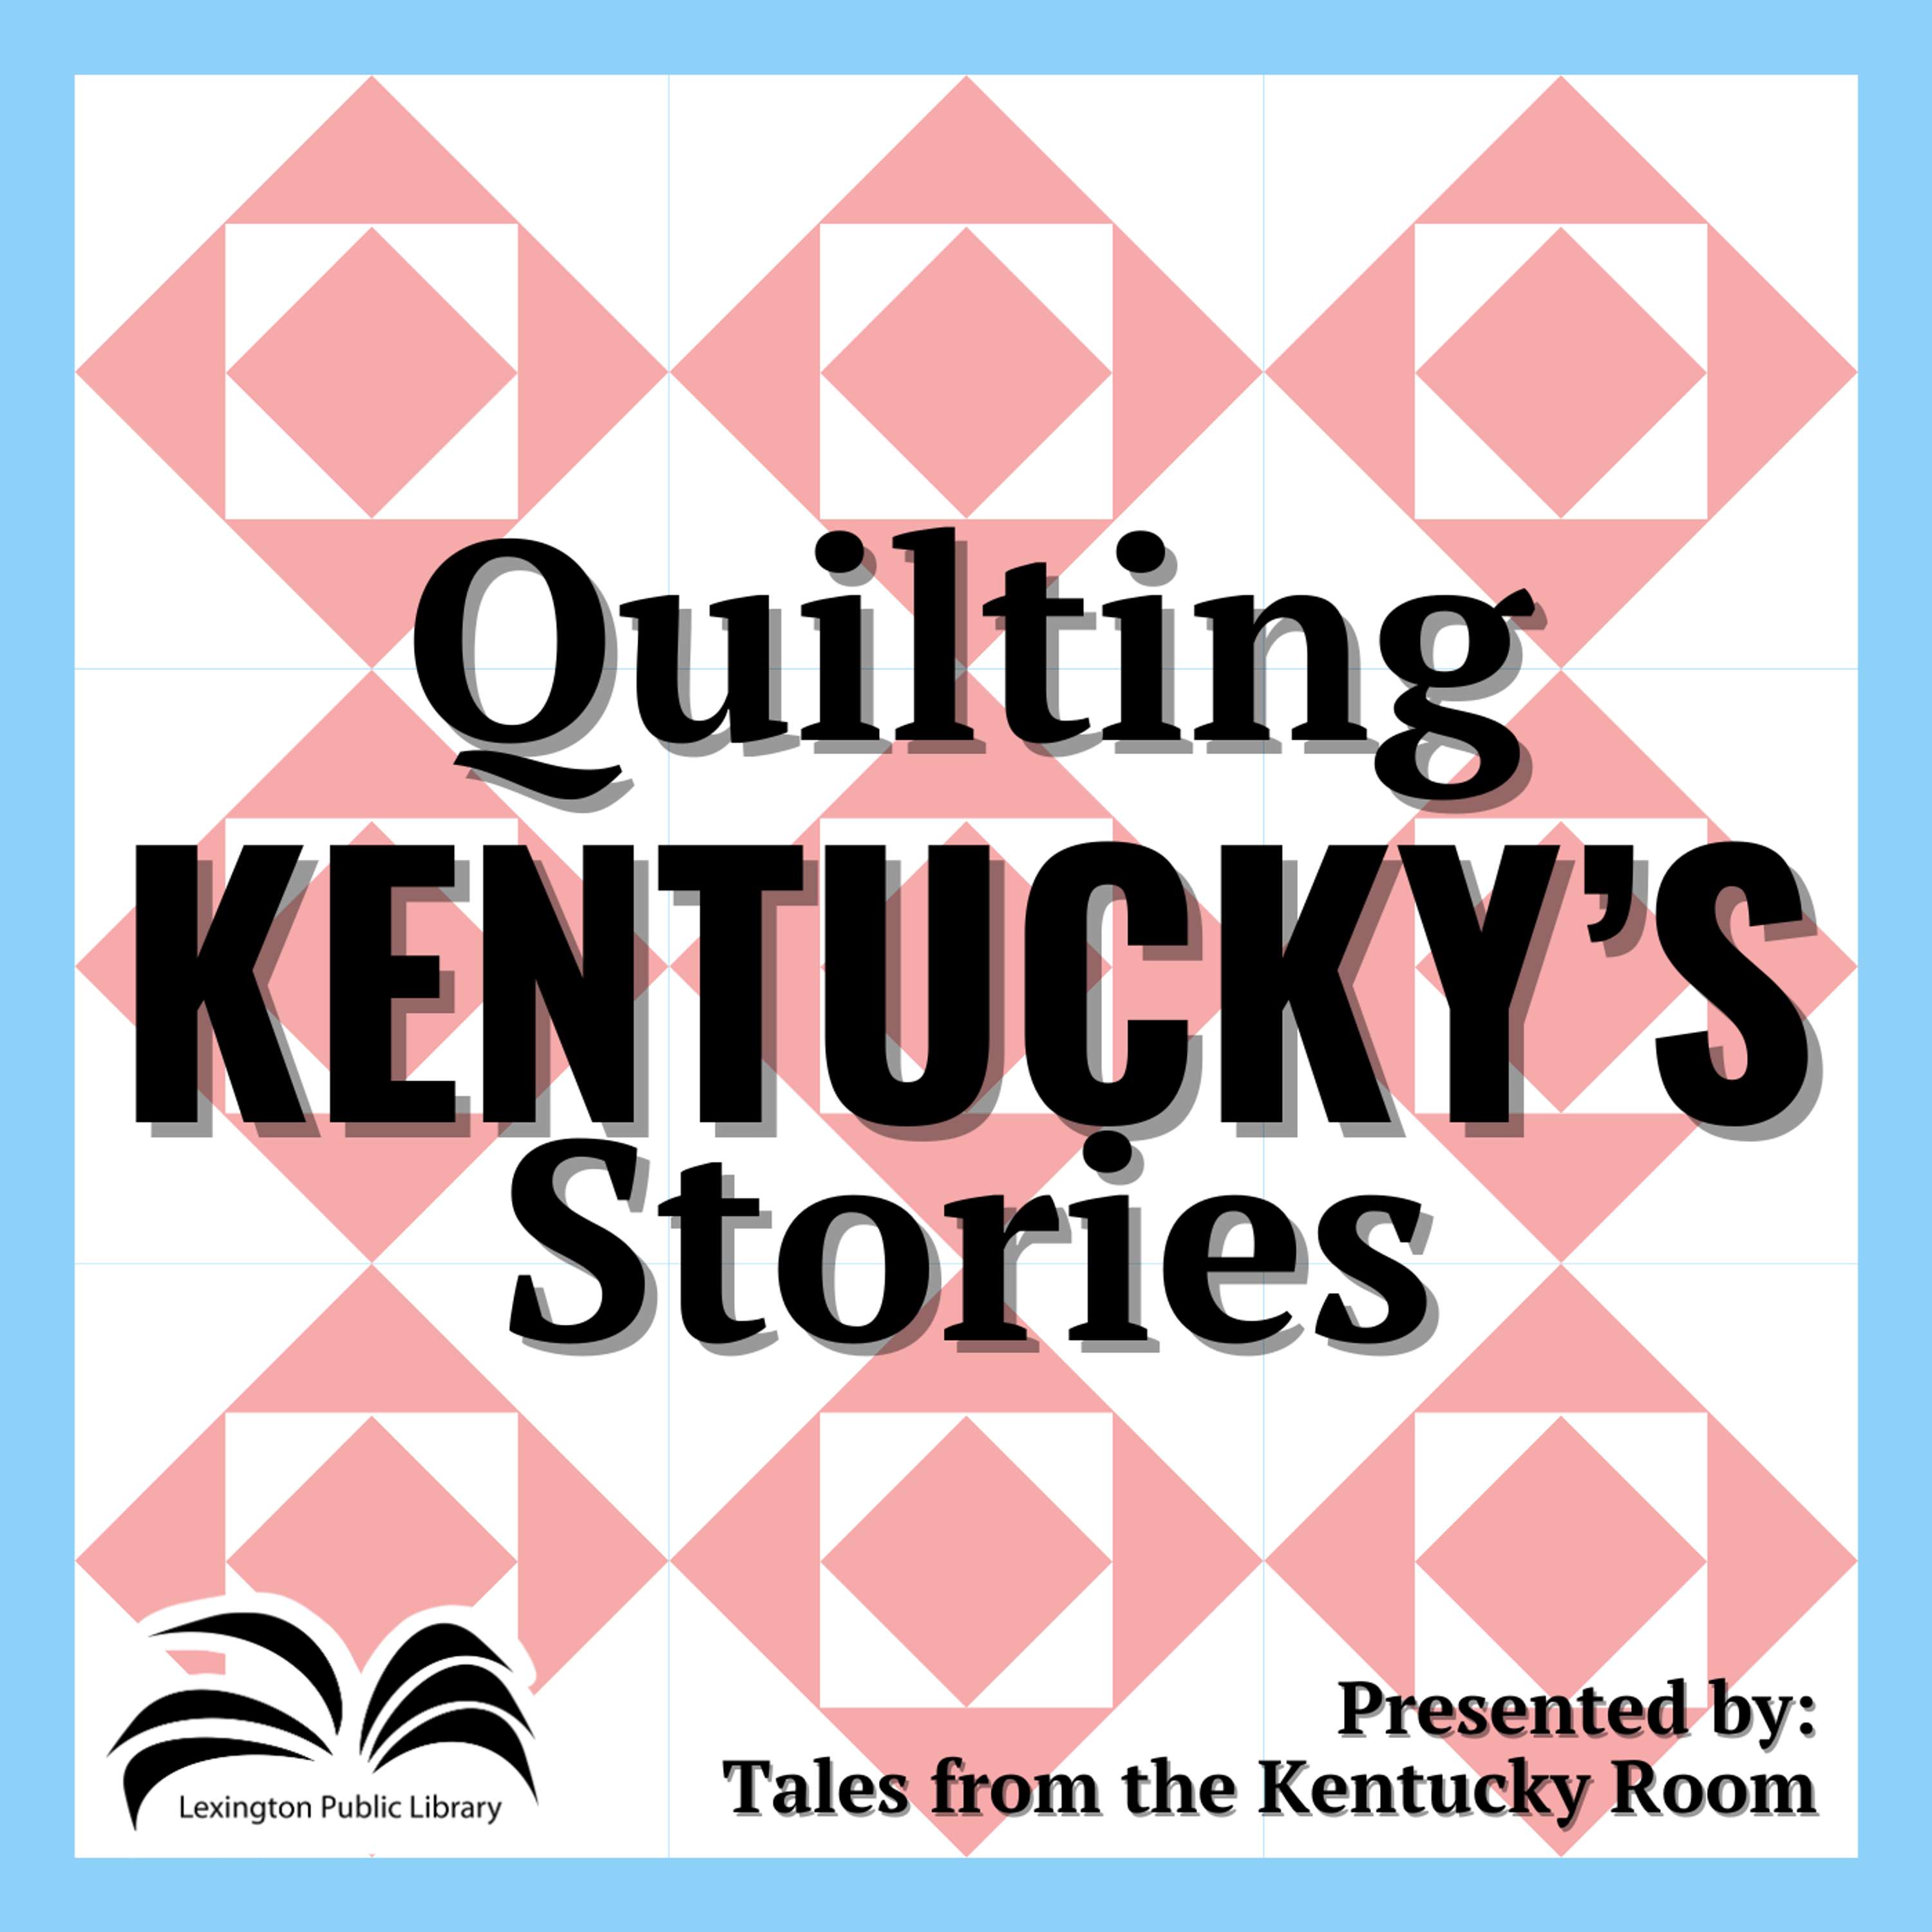 Quilting Kentucky’s Stories: The Fairy Tree by Leo York